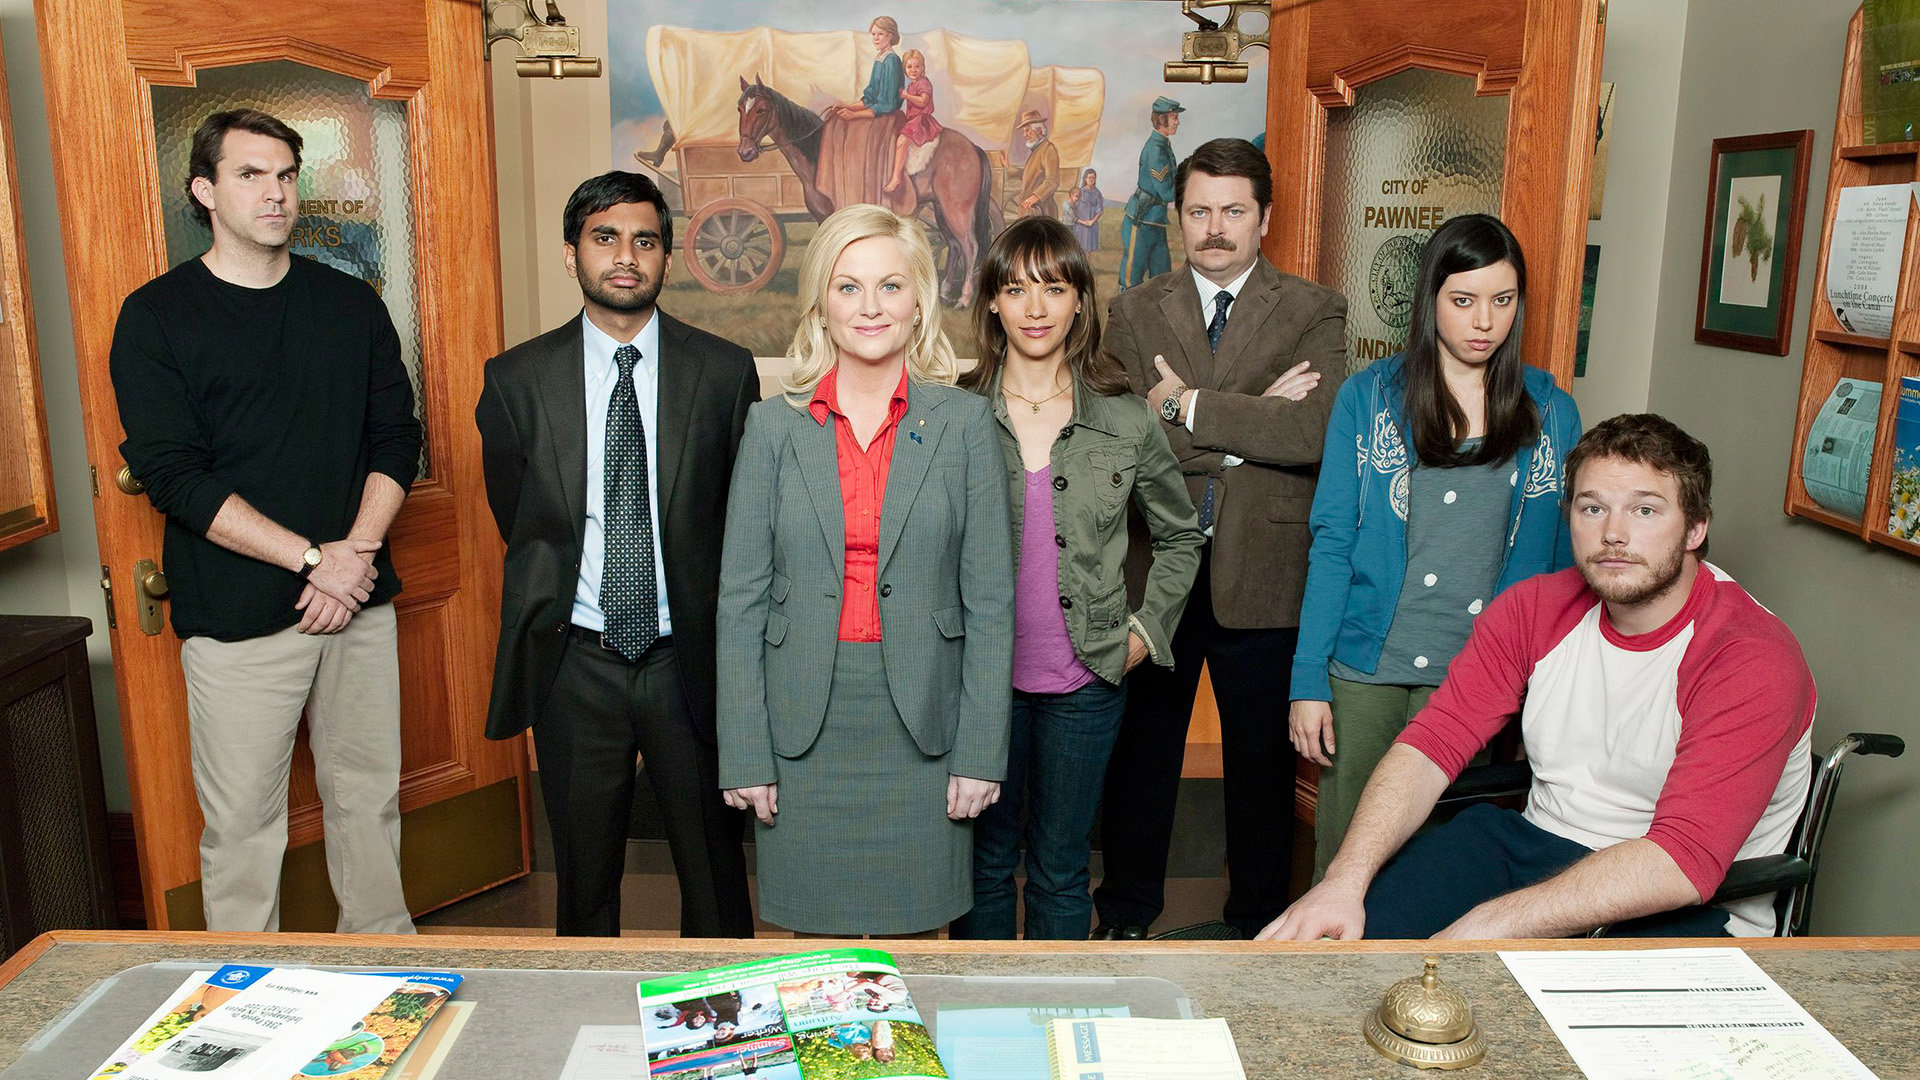 Best Parks And Recreation wallpaper ID:351230 for High Resolution hd 1080p desktop